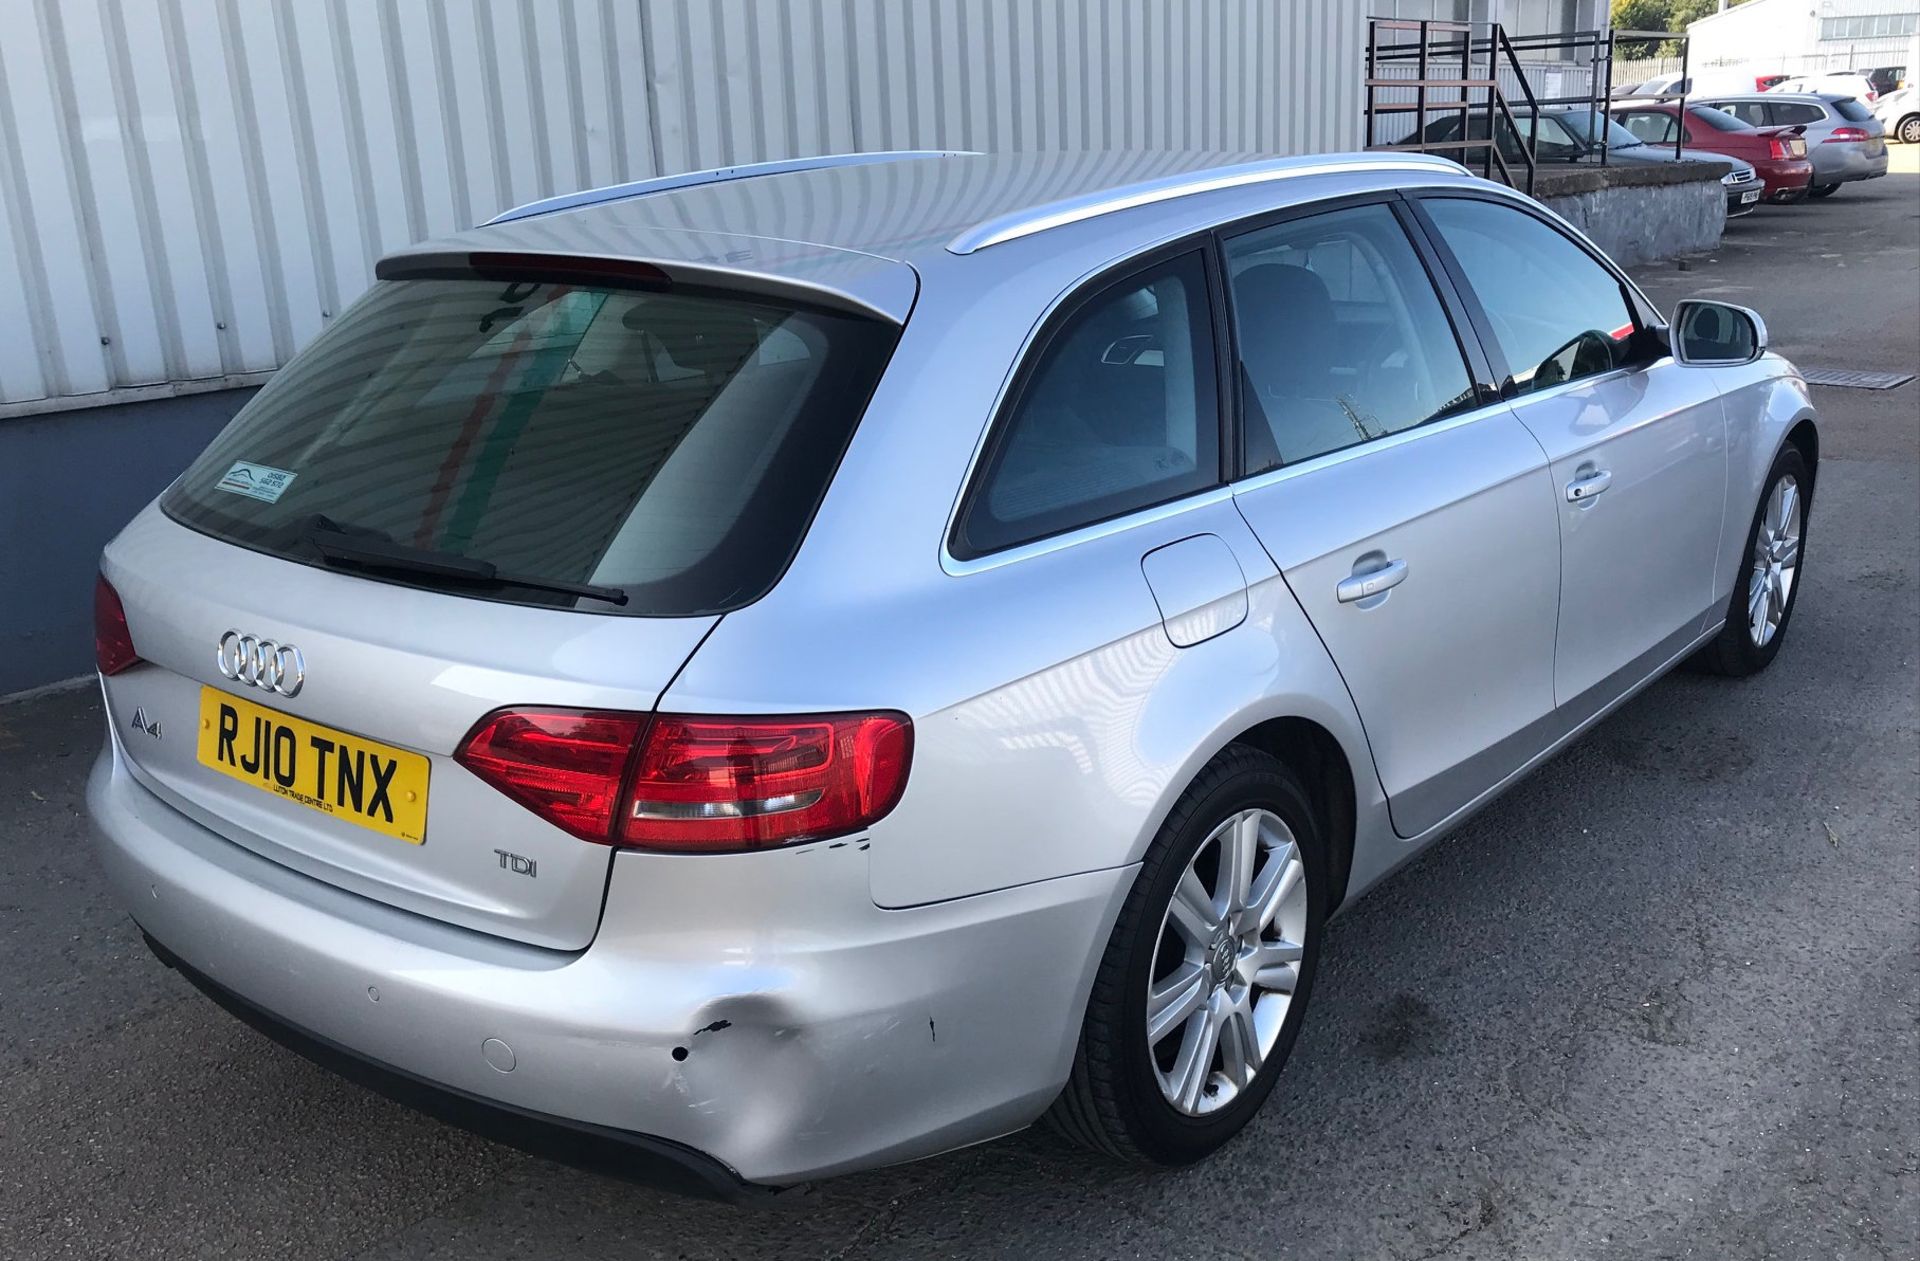 2010 Audi A4 2.0 Tdi SE Avant Automatic 5 Door Estate - CL505 - NO VAT ON THE HAMMER - Location: - Image 12 of 13